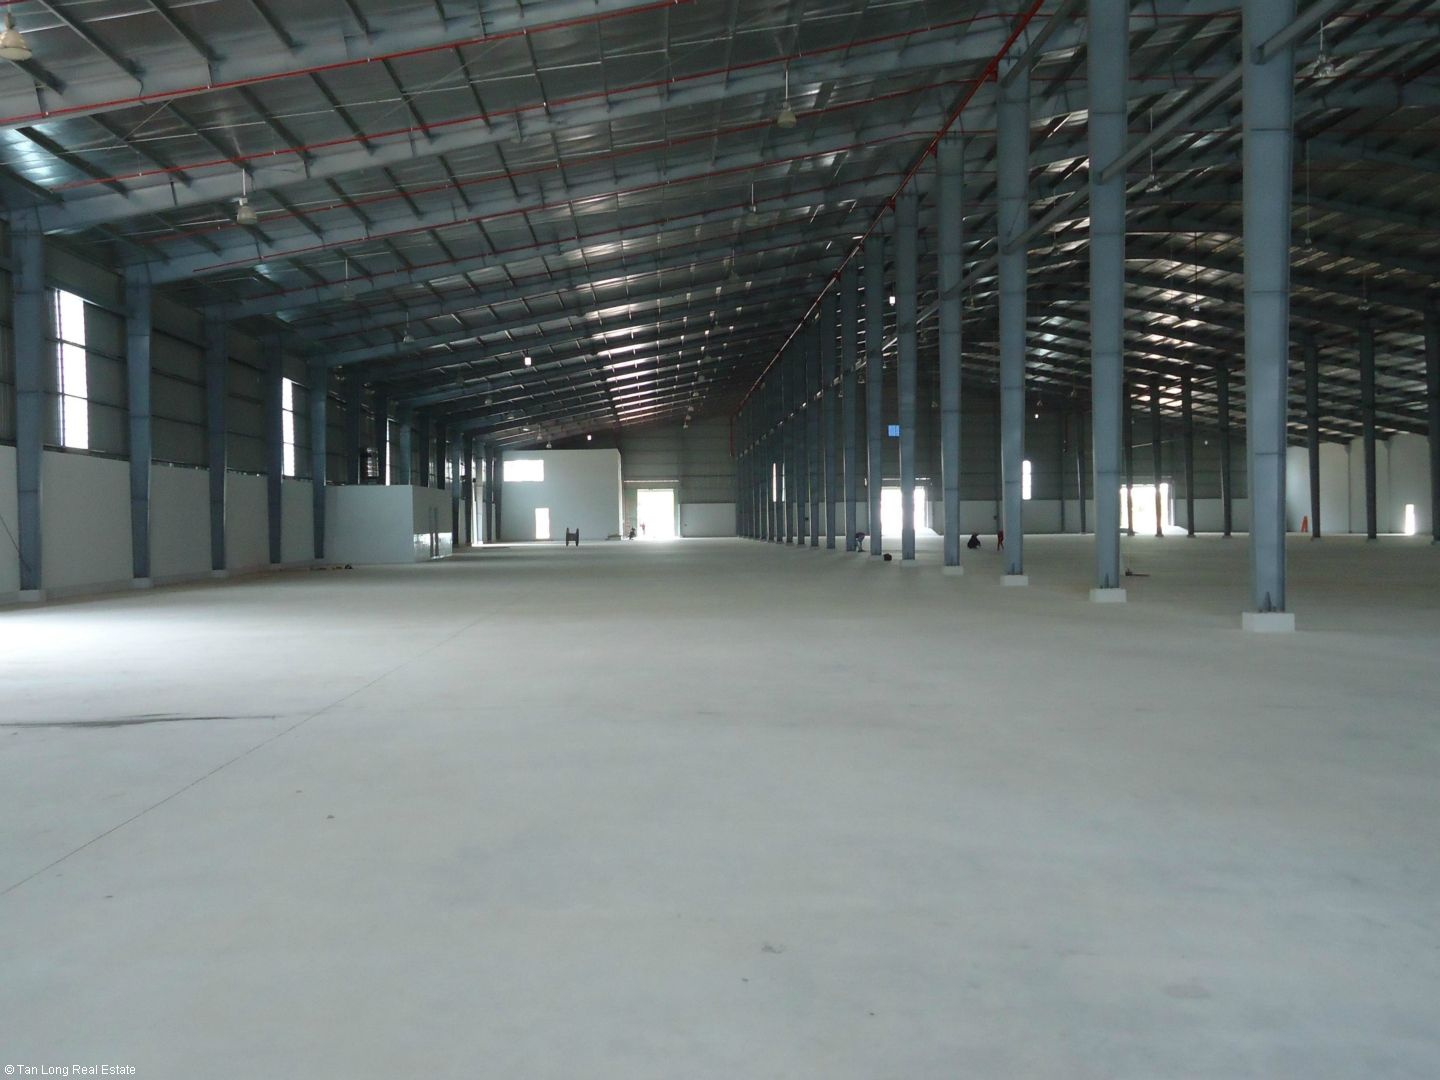 Warehouse for rent in Thanh Mien, Hai Duong 1